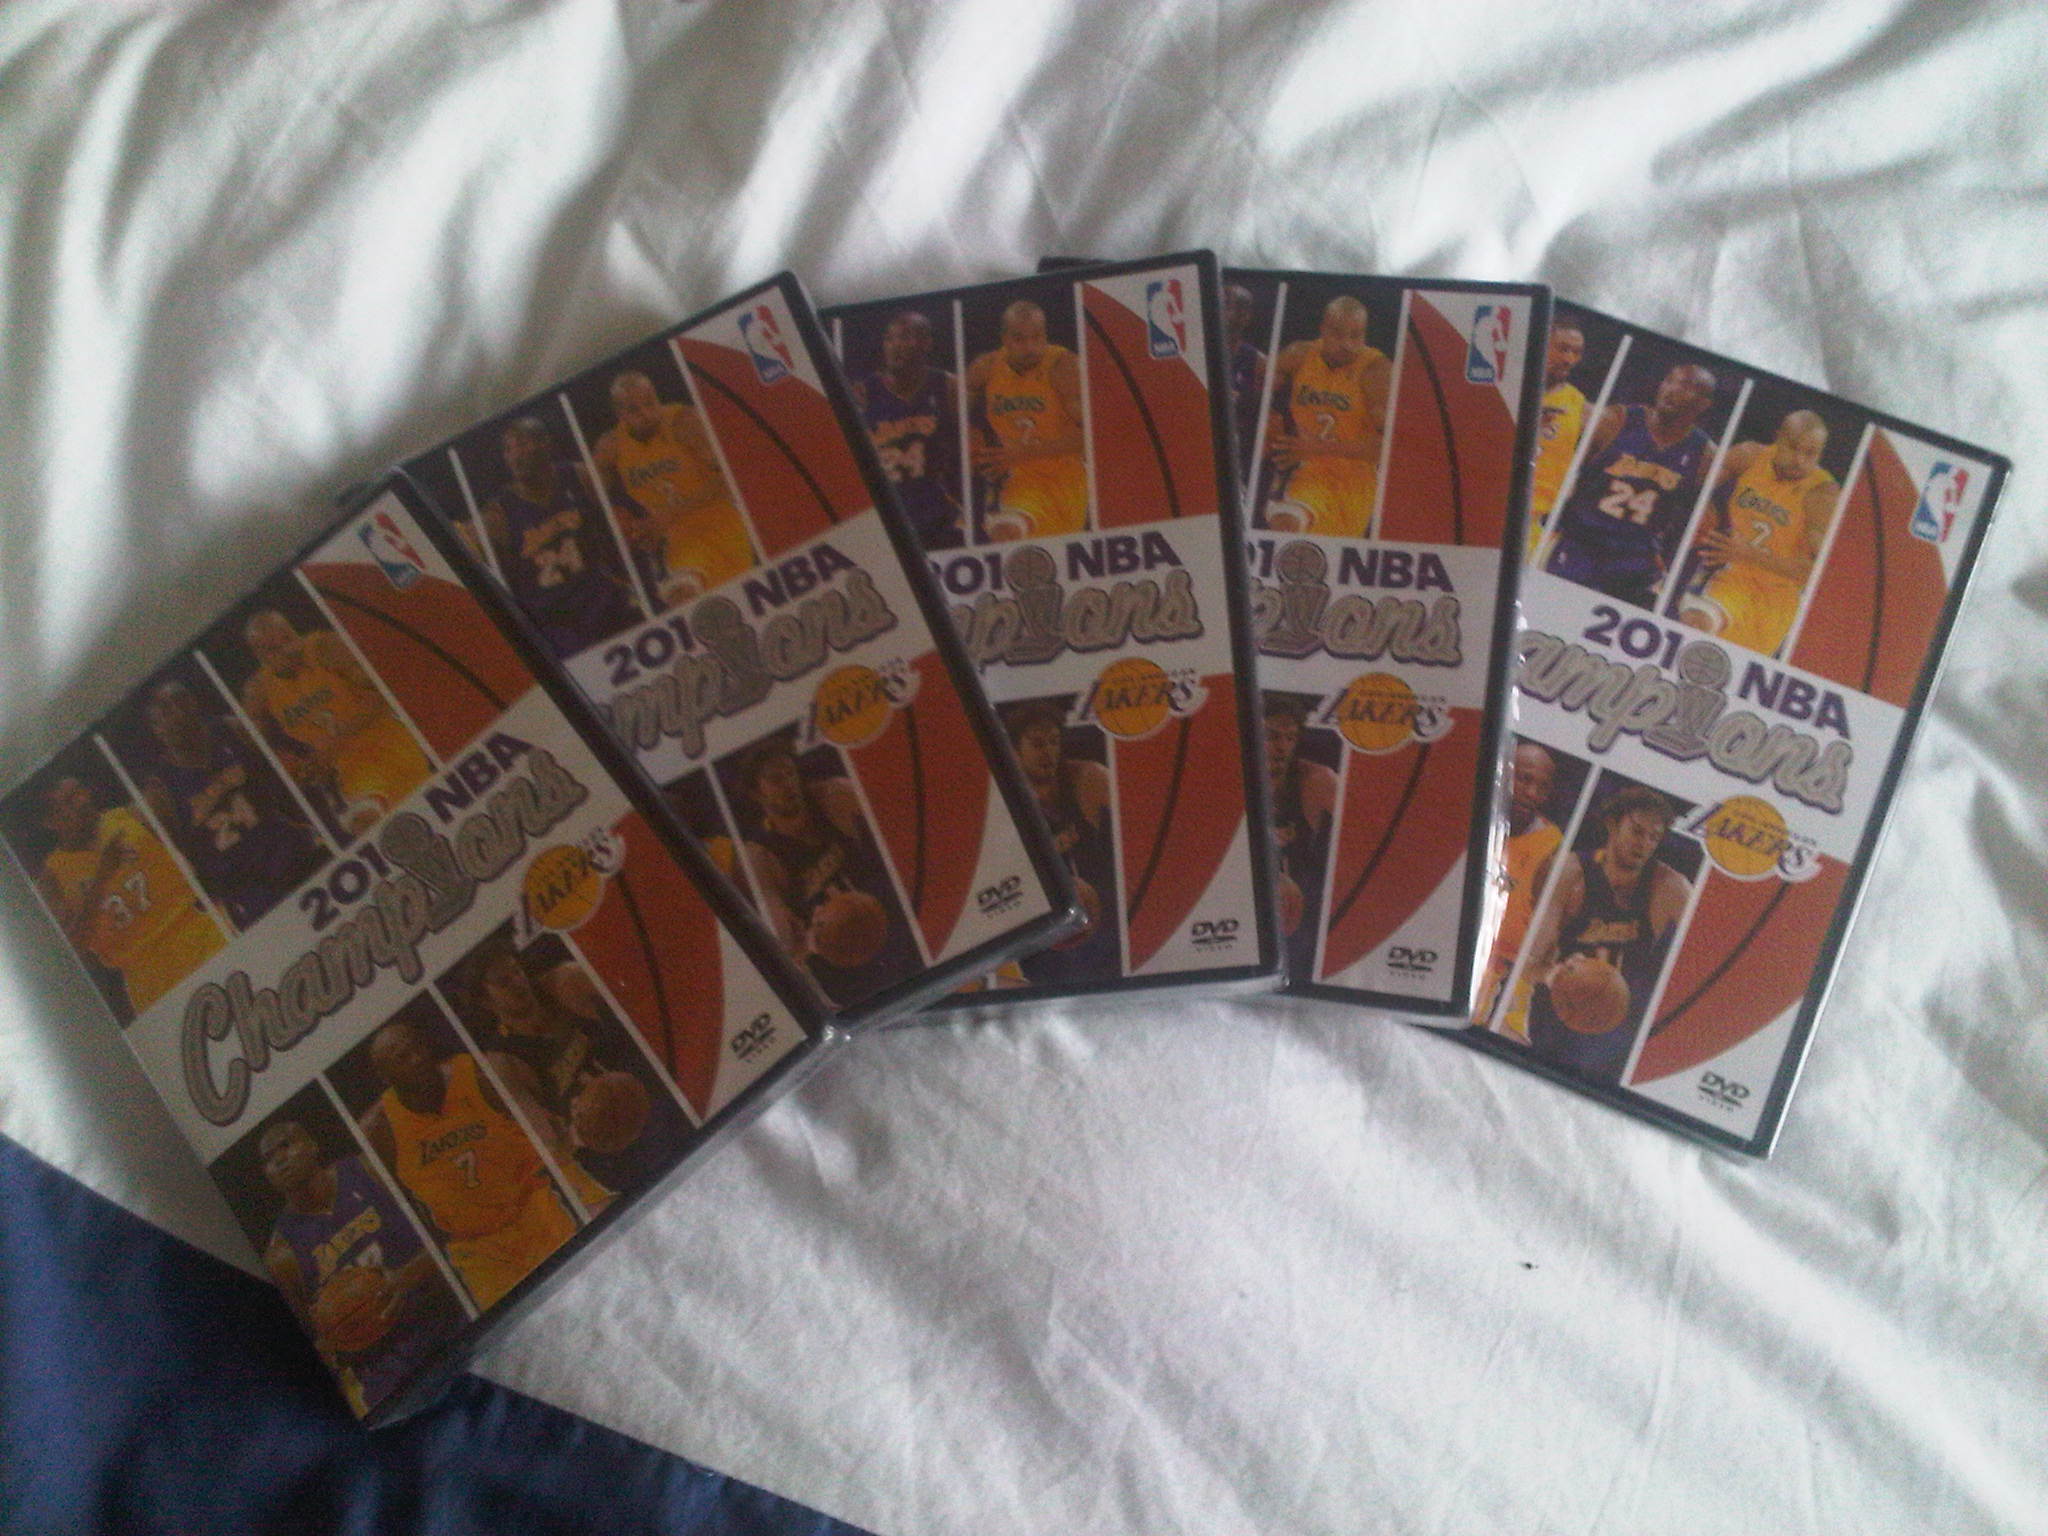 Competition: 2010 NBA Champions Los Angeles Lakers DVD Giveaway! 